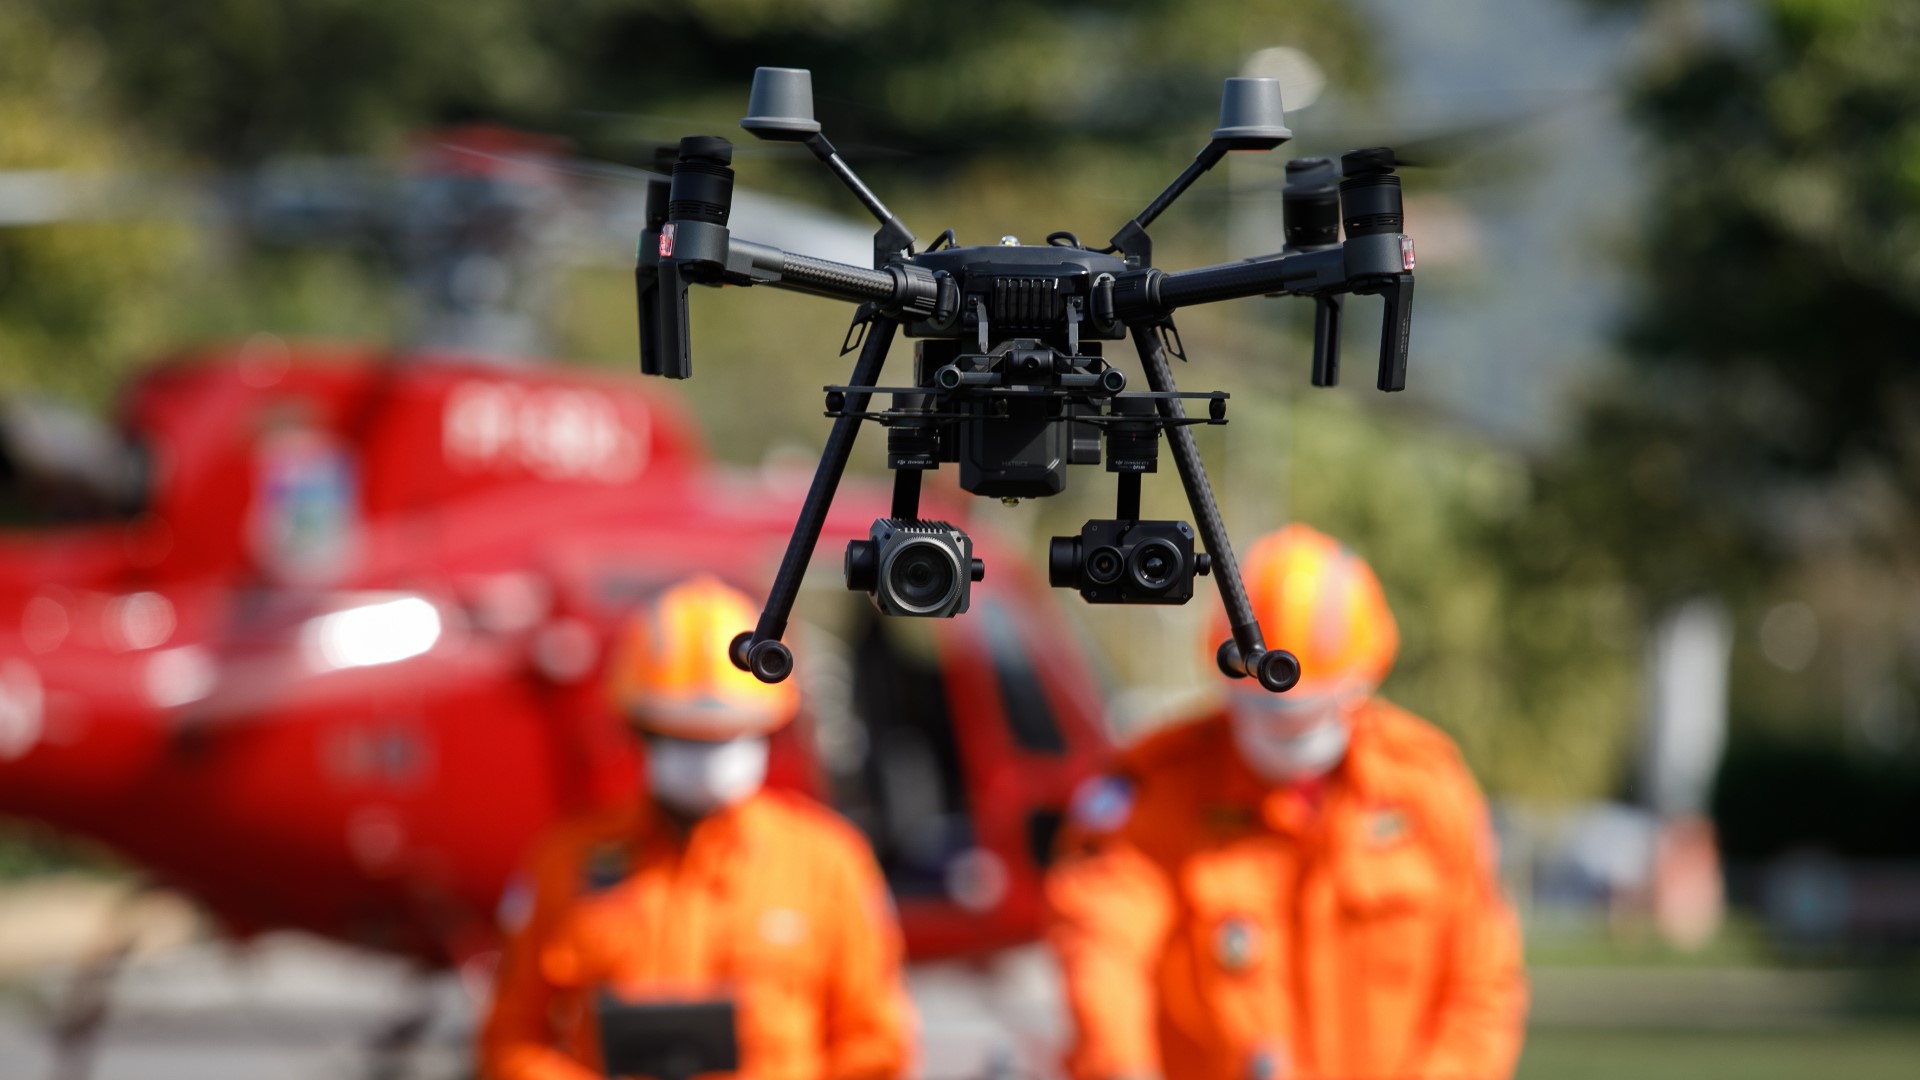 Arlington County is looking for community input on a new drone program for first responders they are looking to implement in 2024.